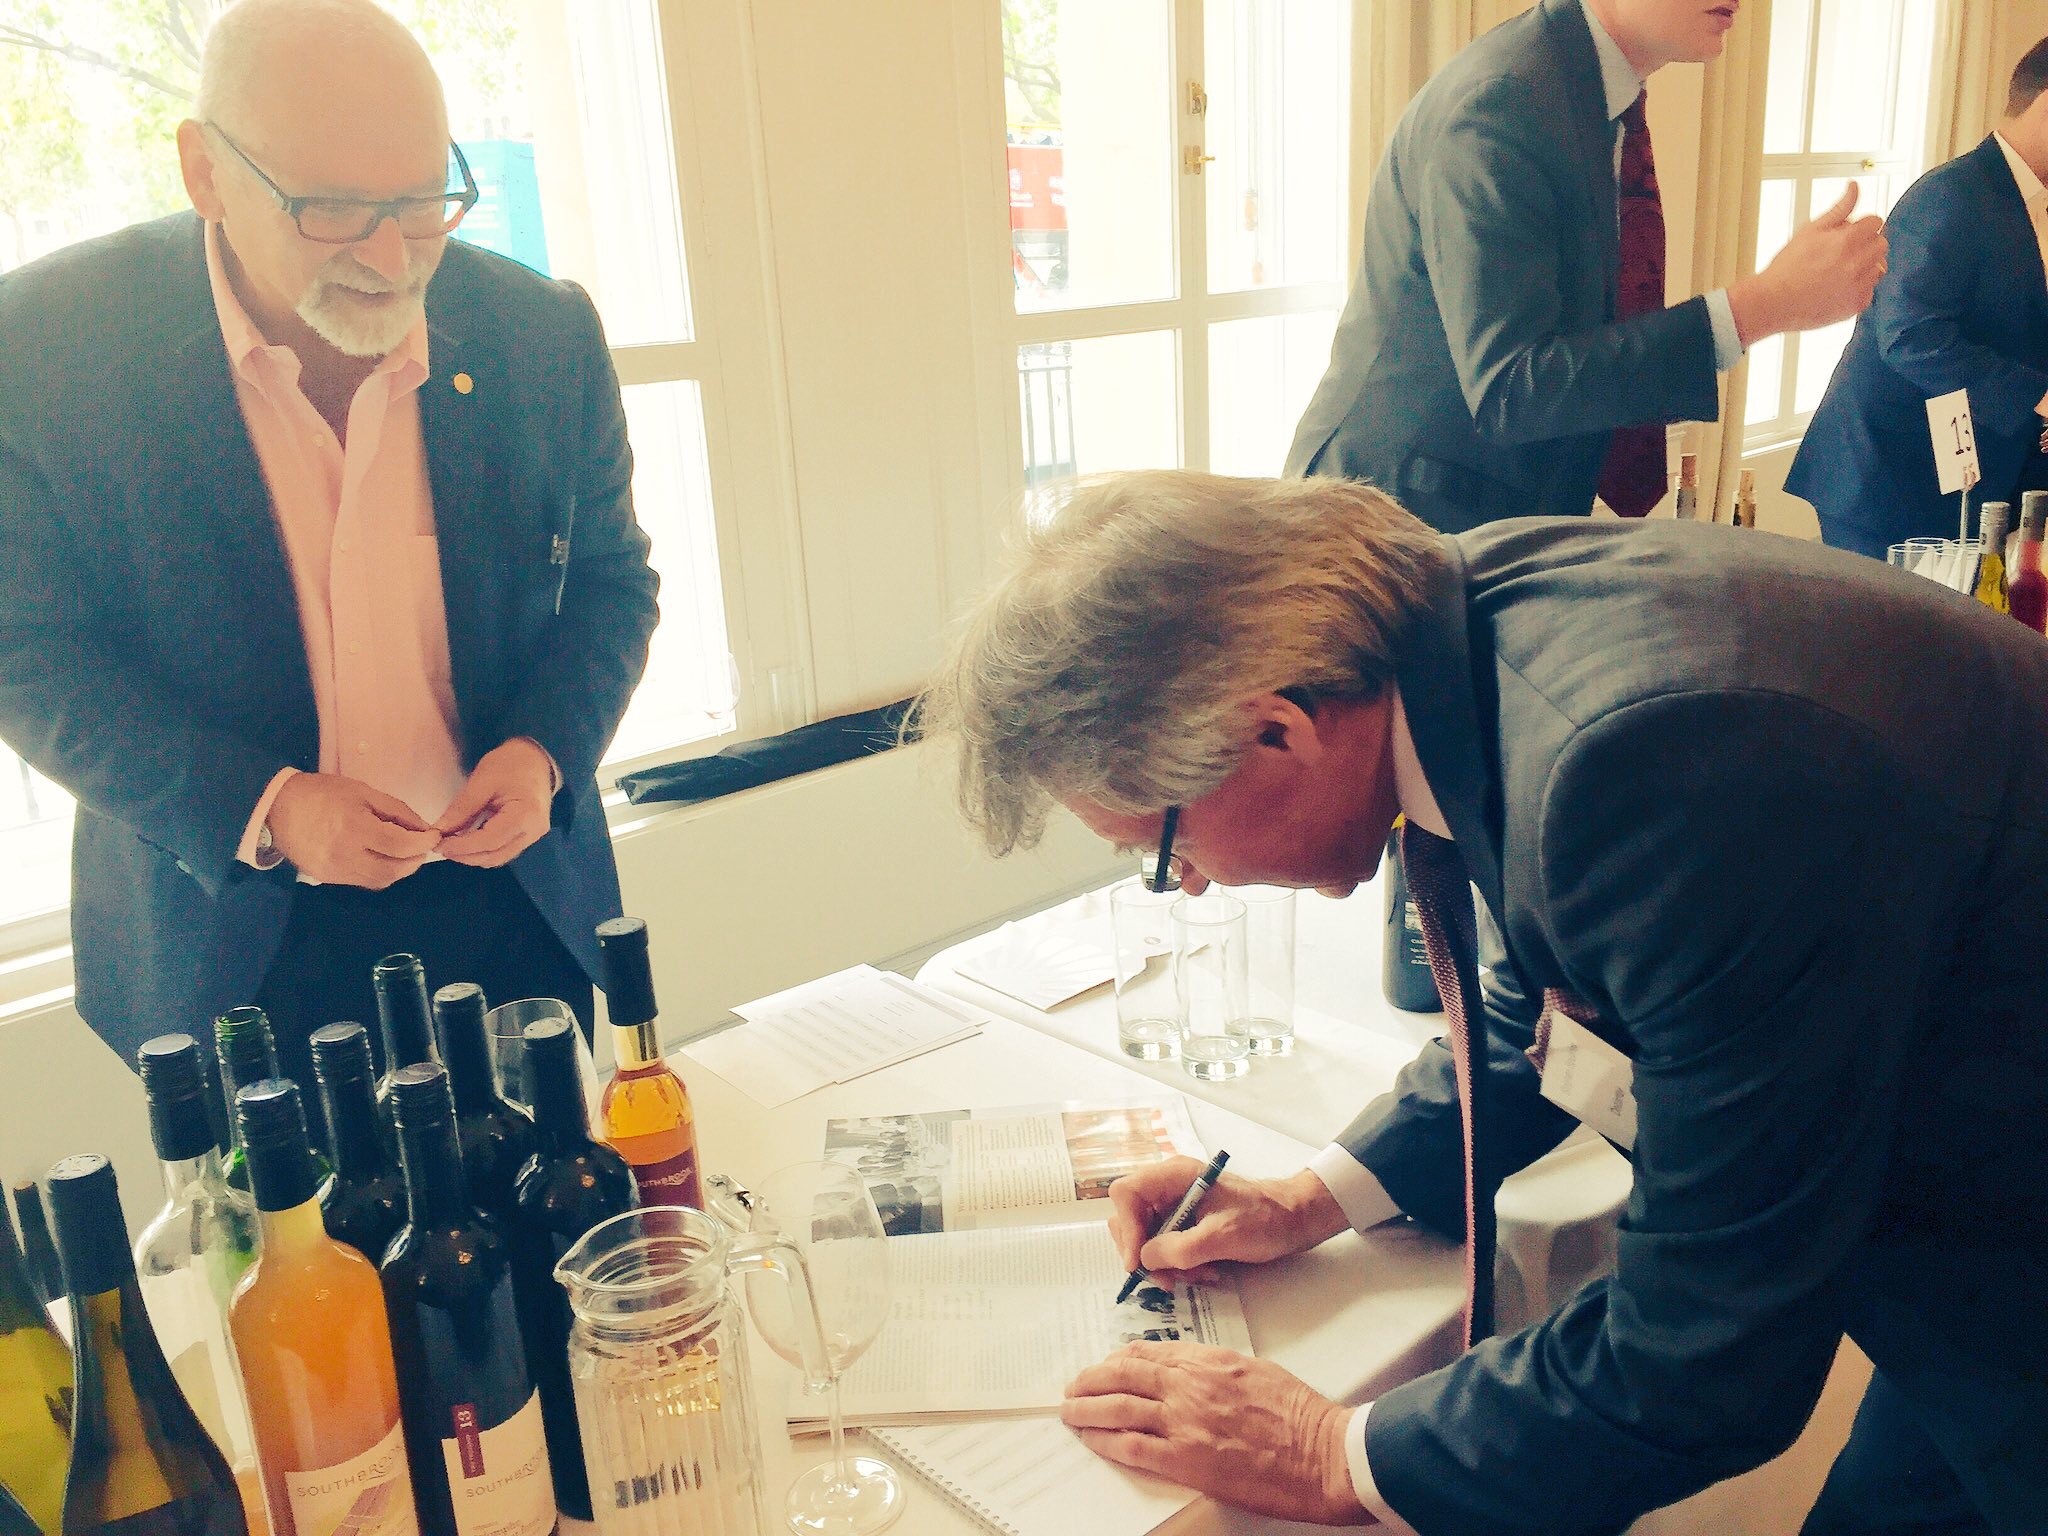 Stephen Spurrier signing an autograph for Bill Redelmeir, founder of Southbrook winery in Ontario, Canada